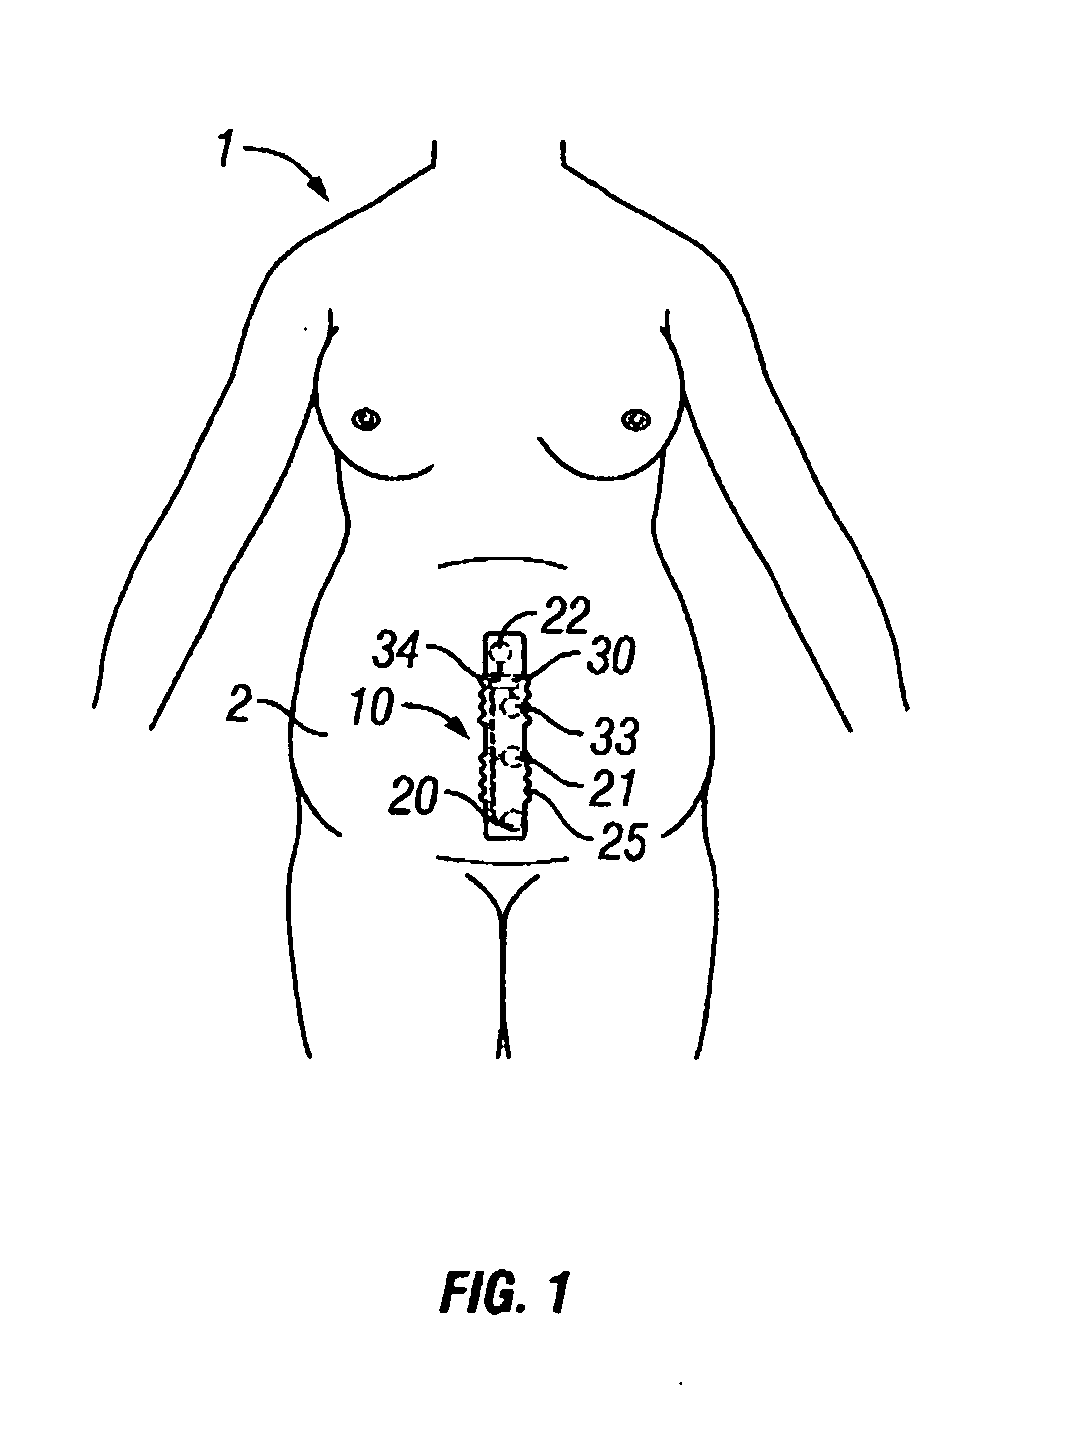 Intrapartum monitor patch